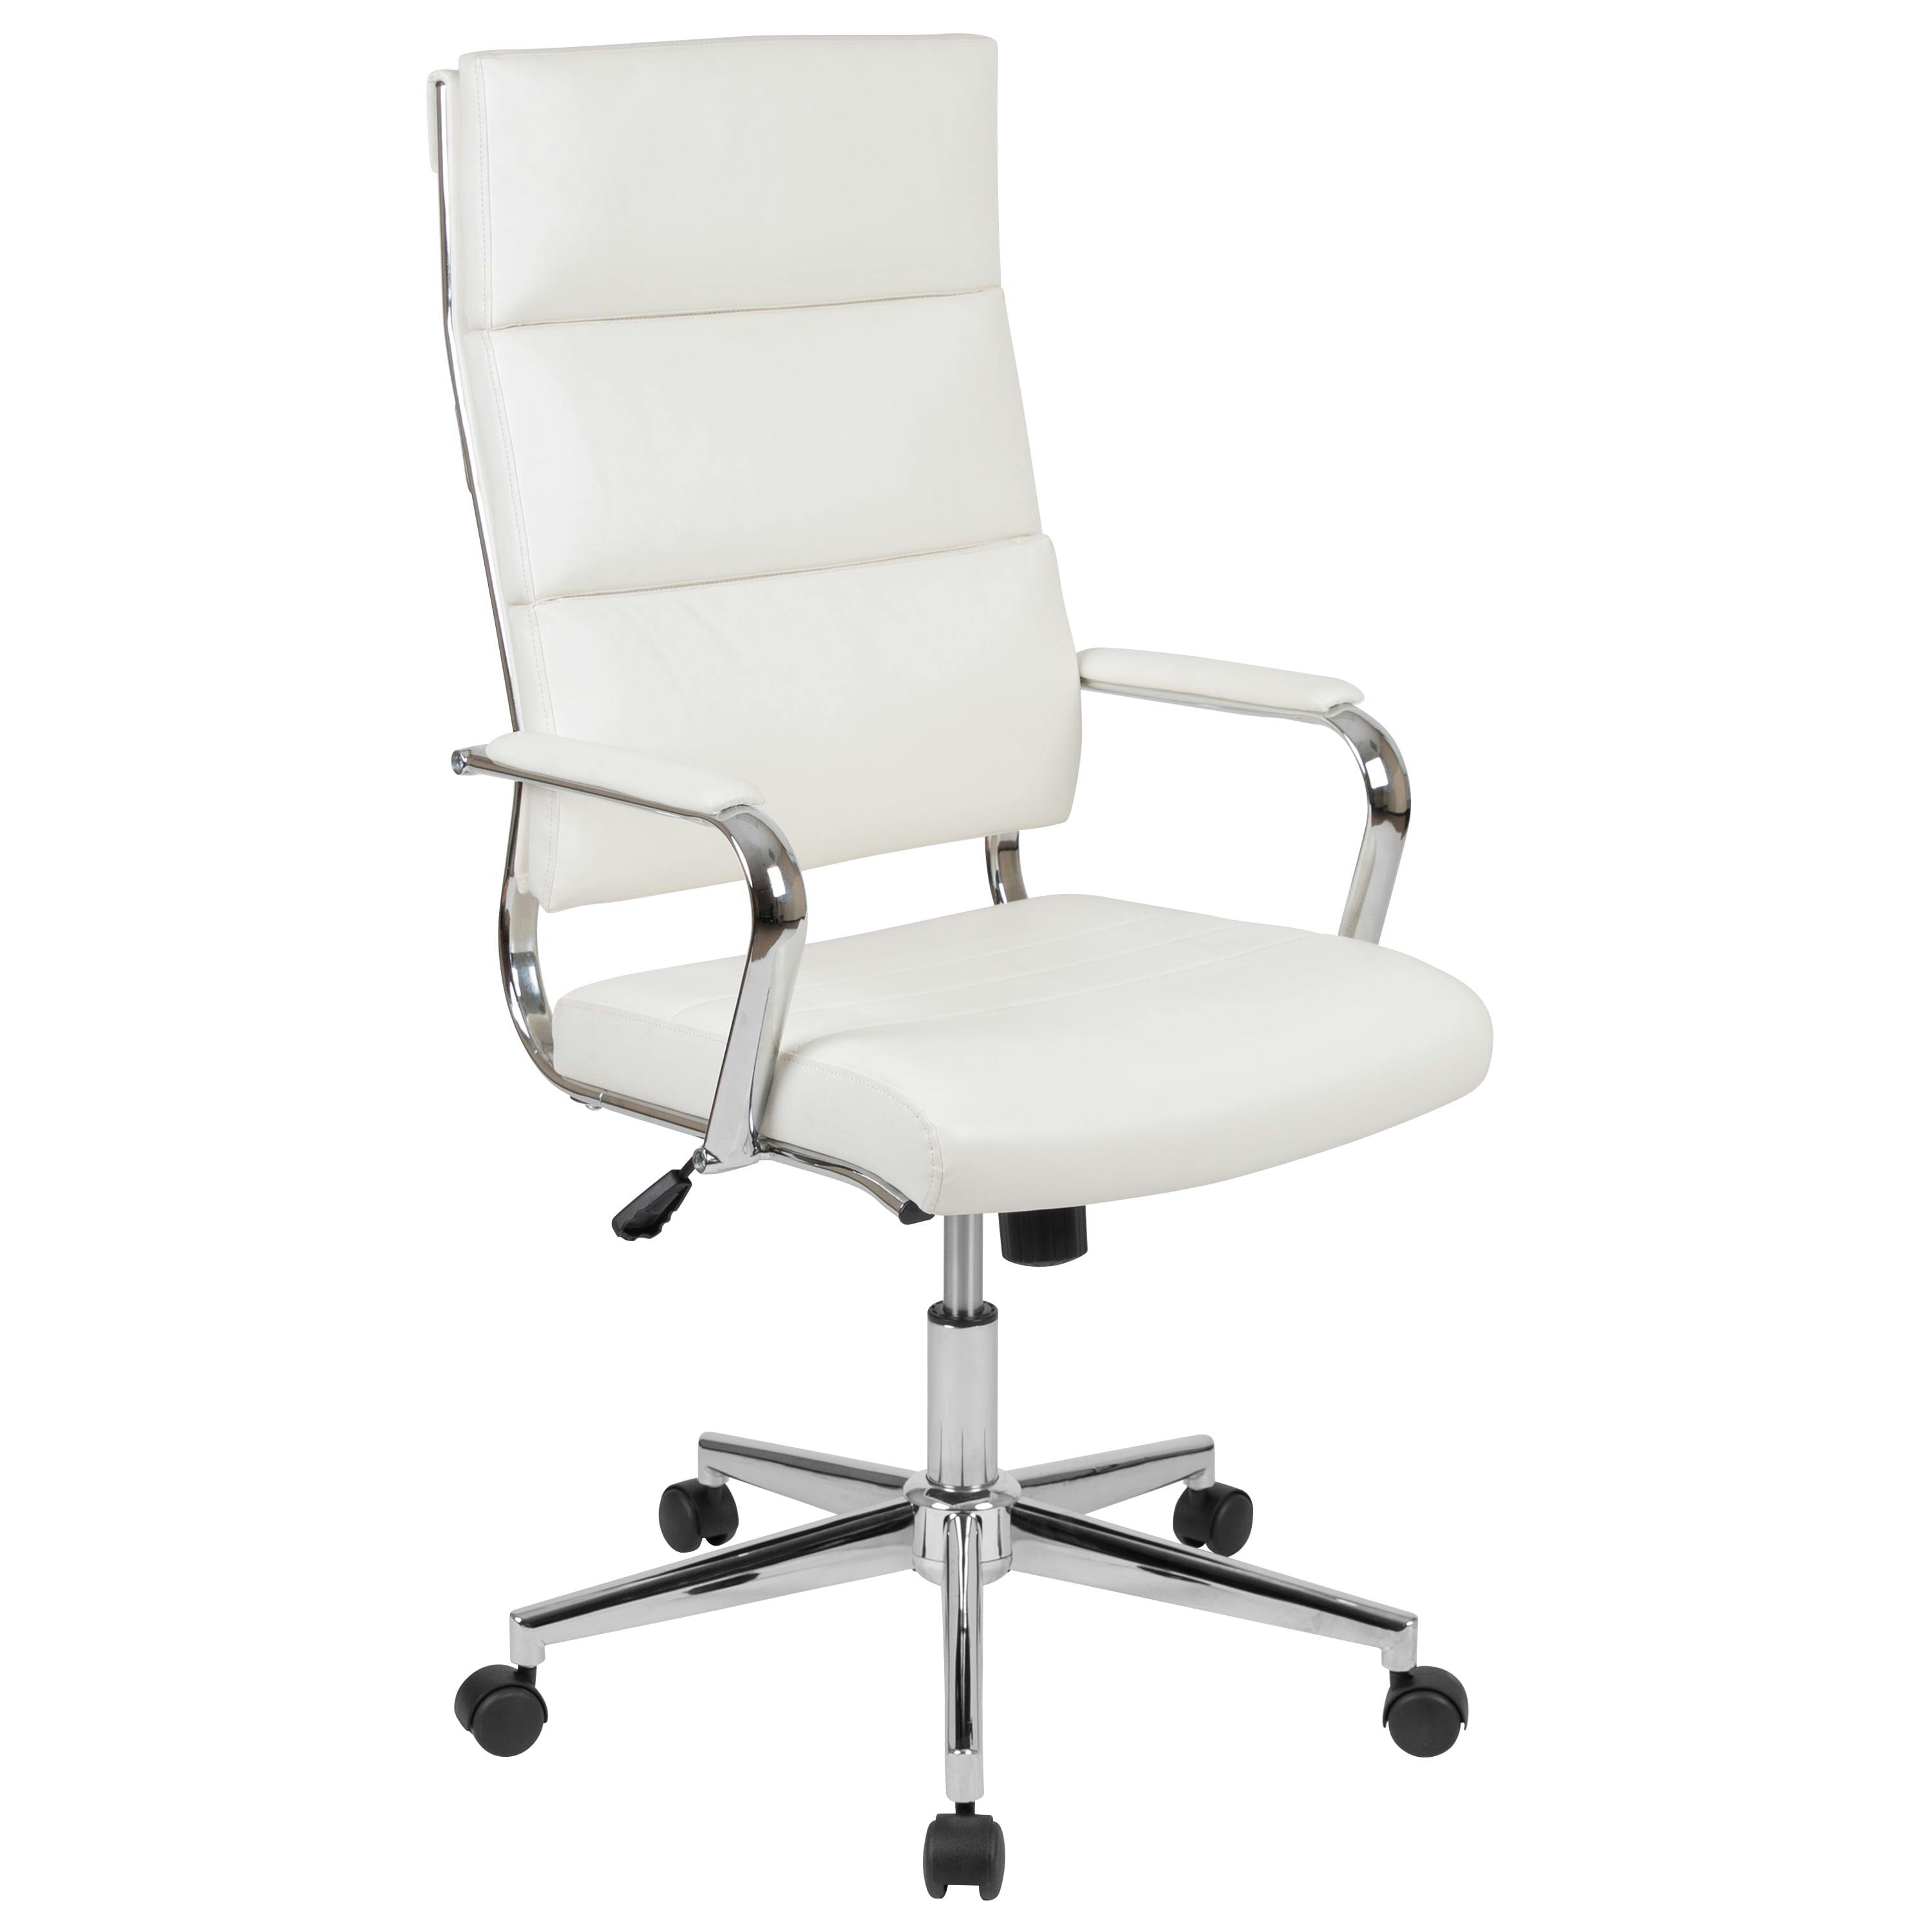 Exquisite White LeatherSoft & Chrome High-Back Executive Swivel Chair